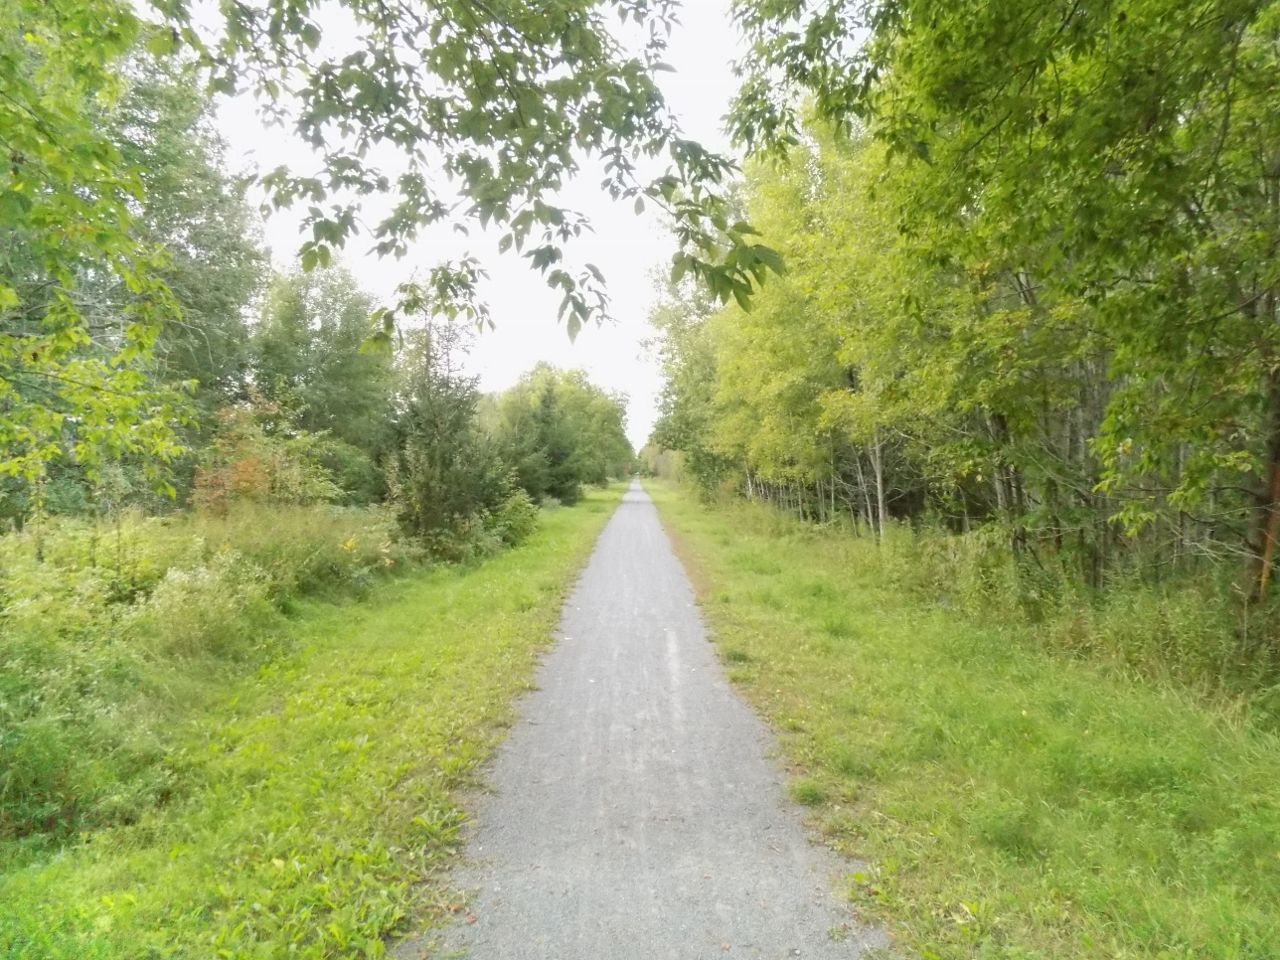 Prescott-Russell Recreational Trail wants your support